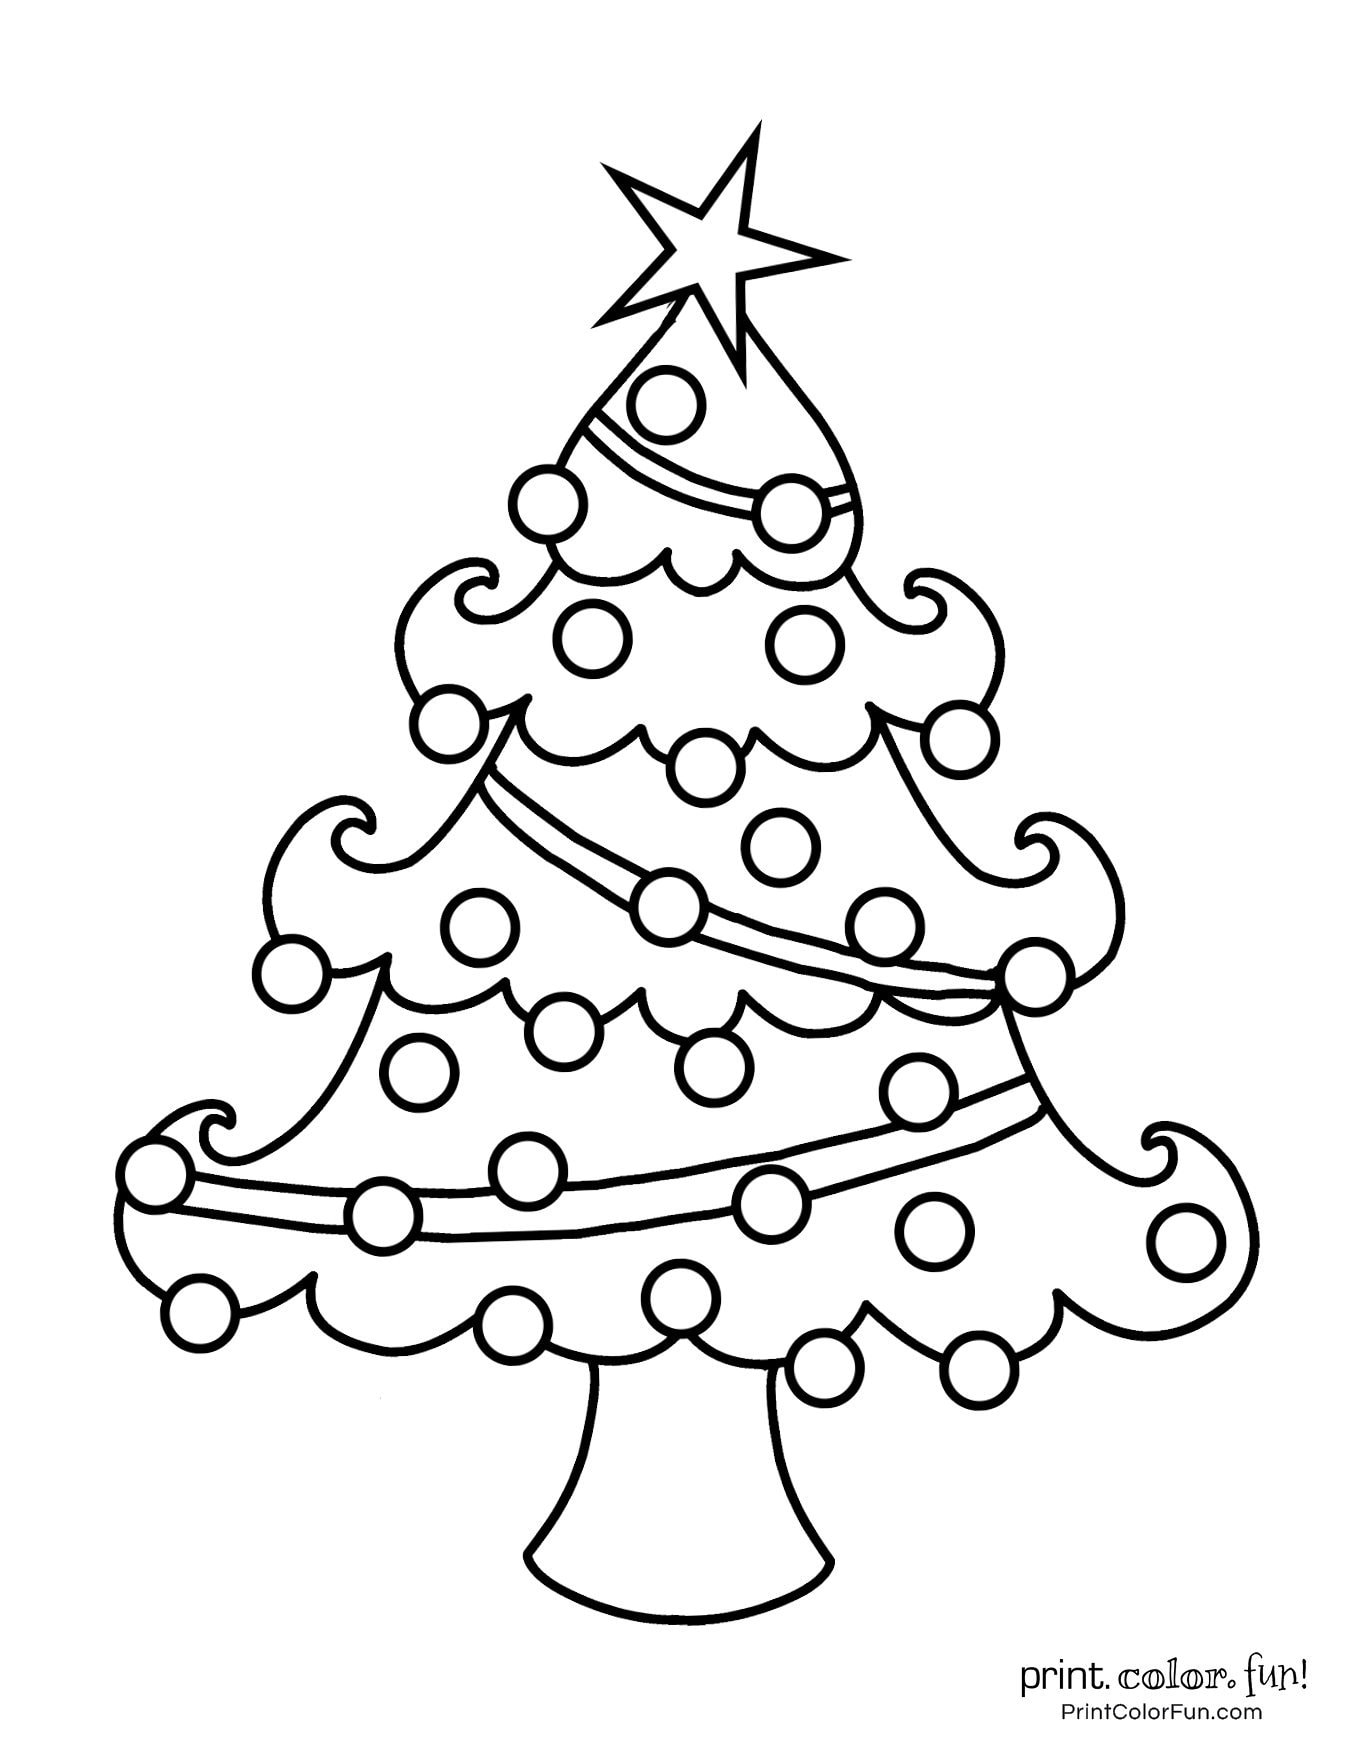 top-100-christmas-tree-coloring-pages-the-ultimate-free-printable-collection-print-color-fun